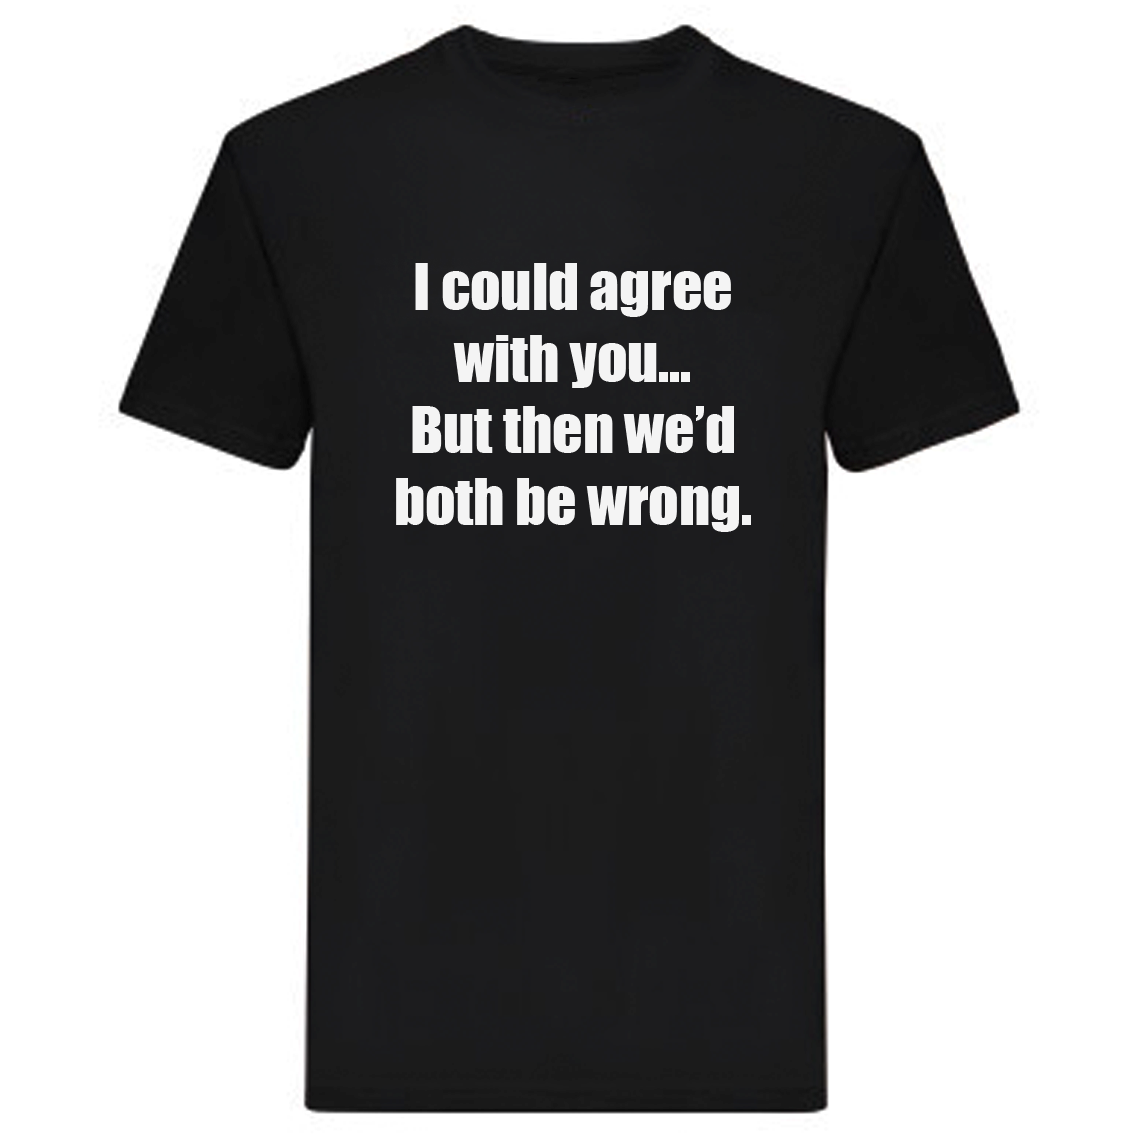 T-Shirt - I could agree with you, but then we'd both be wrong